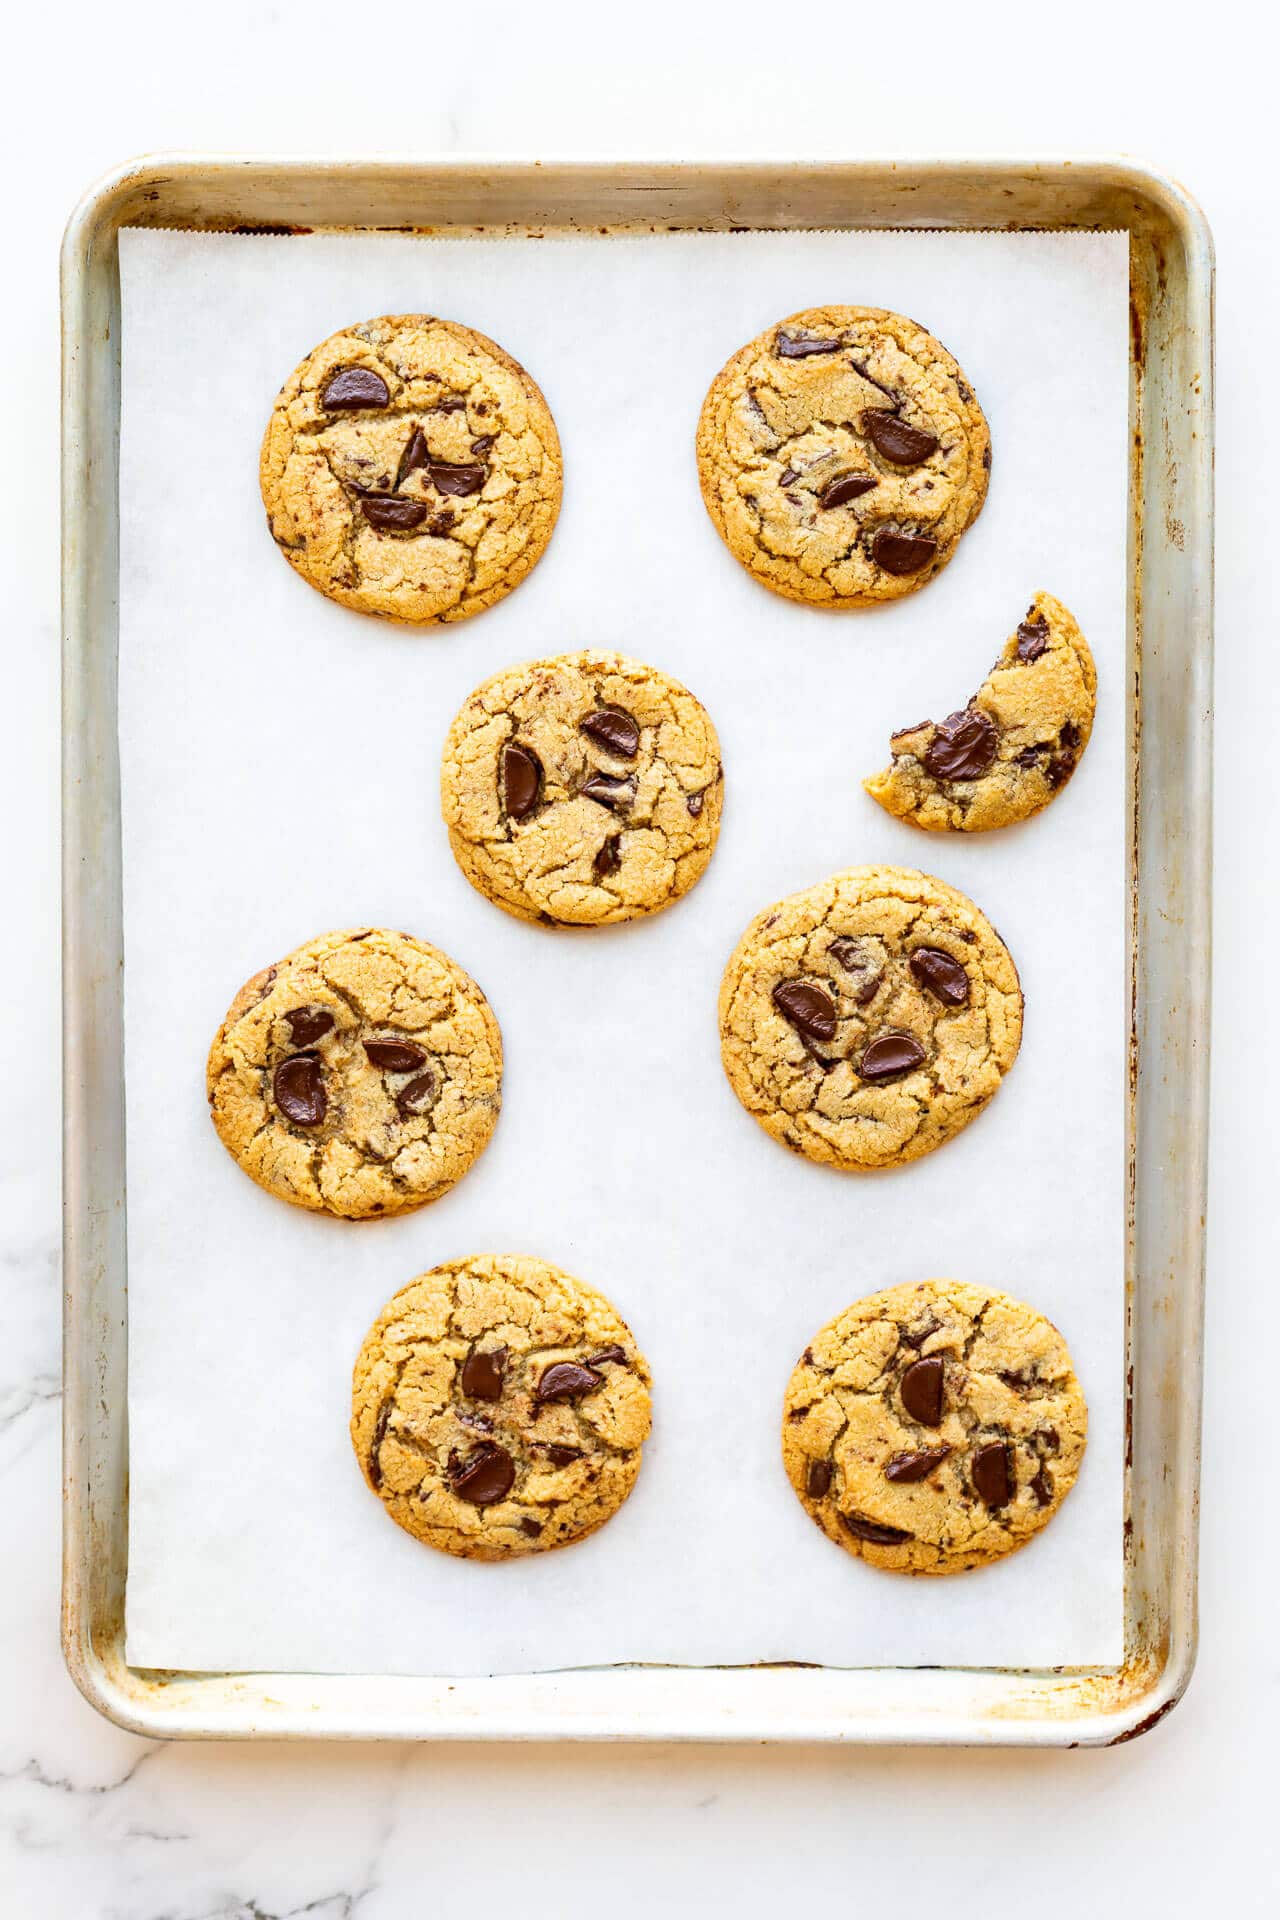 Thick chewy chocolate chip cookies baked with chunks of 70 % dark chocolate on a light sheet pan lined with parchment. One cookie is half-eaten